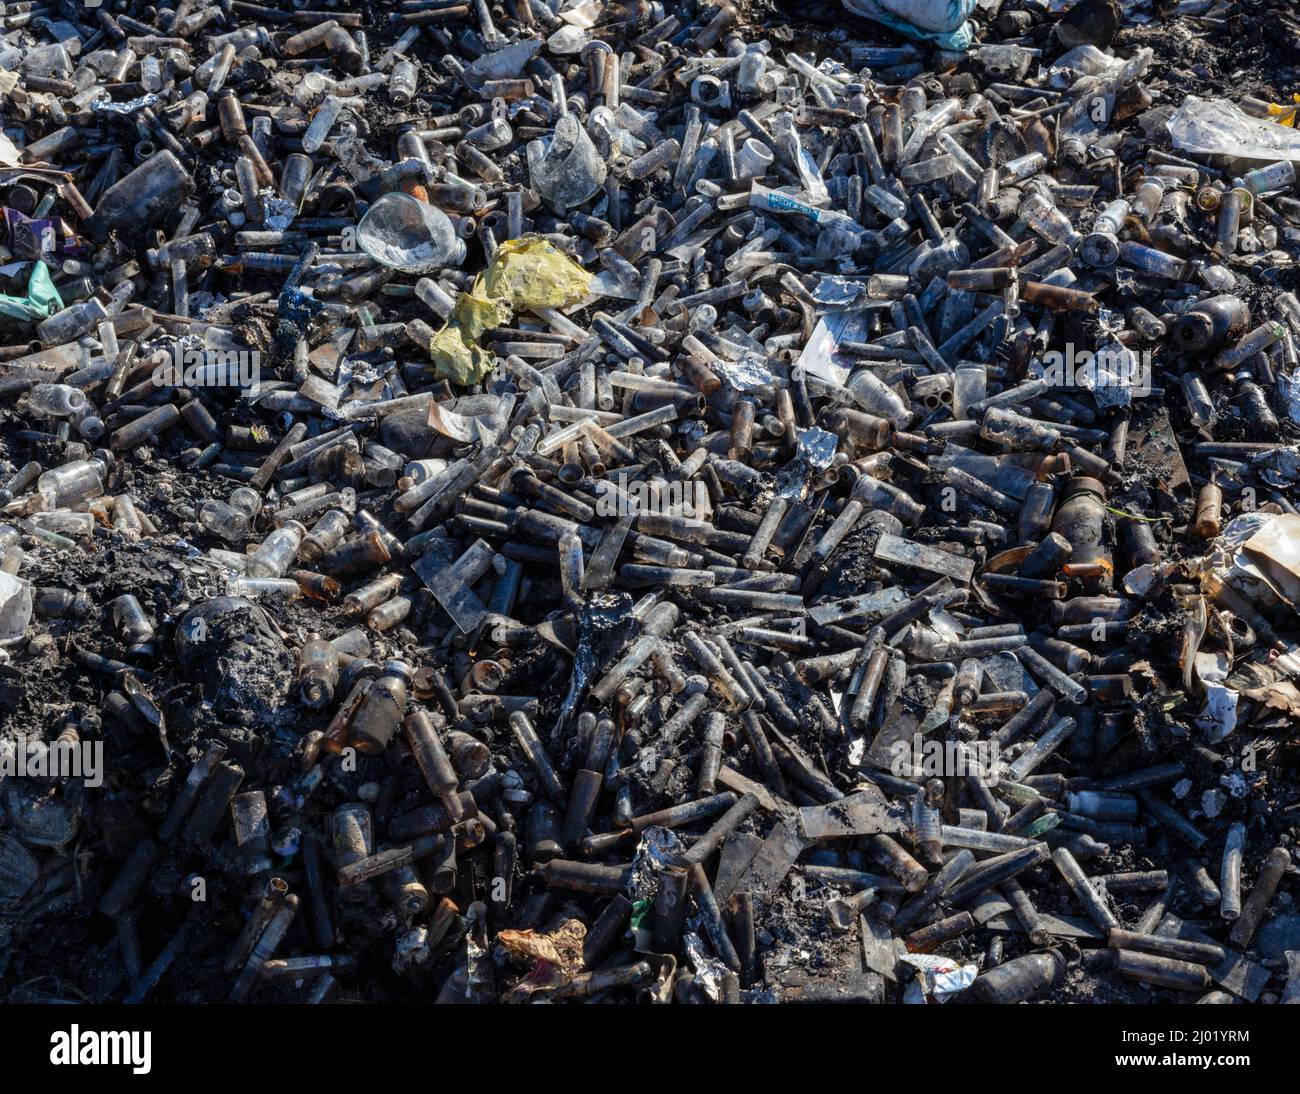 Solid waste dumping site with test tubes and lab wastage Stock Photo